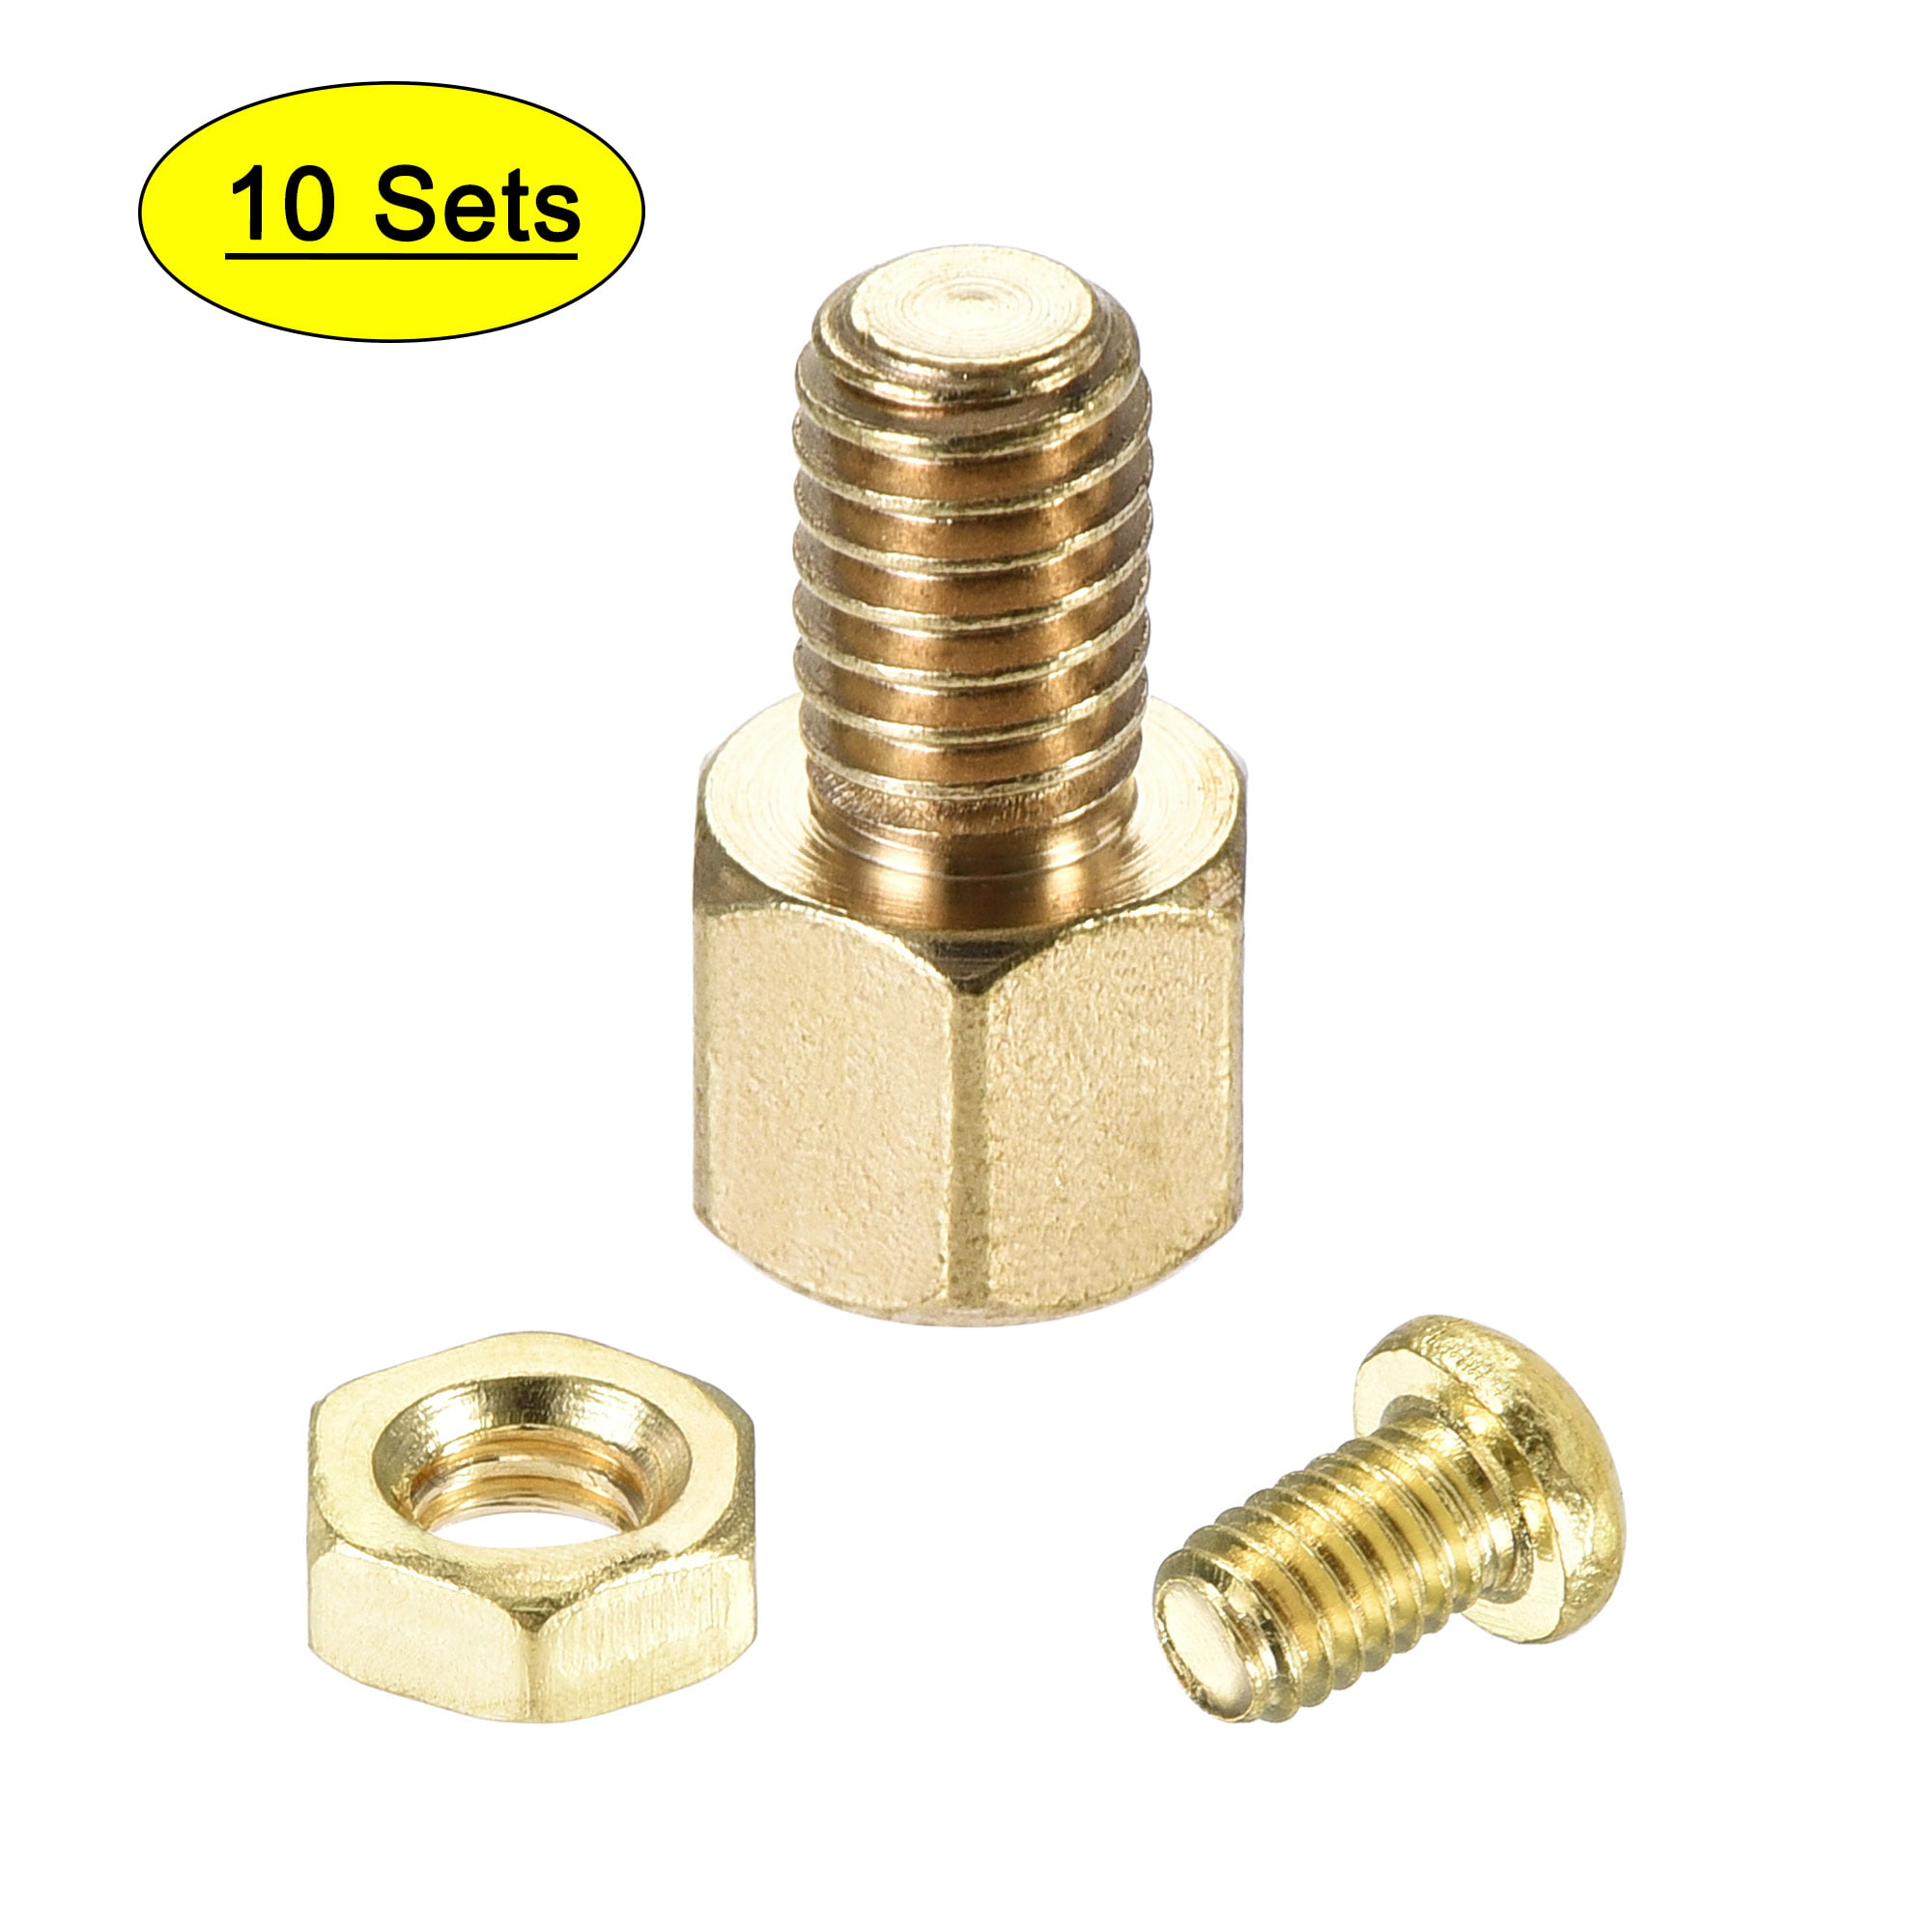 6 mm Male to Female Hex Brass Spacer Standoff 20pcs M2.5 x 13 mm 